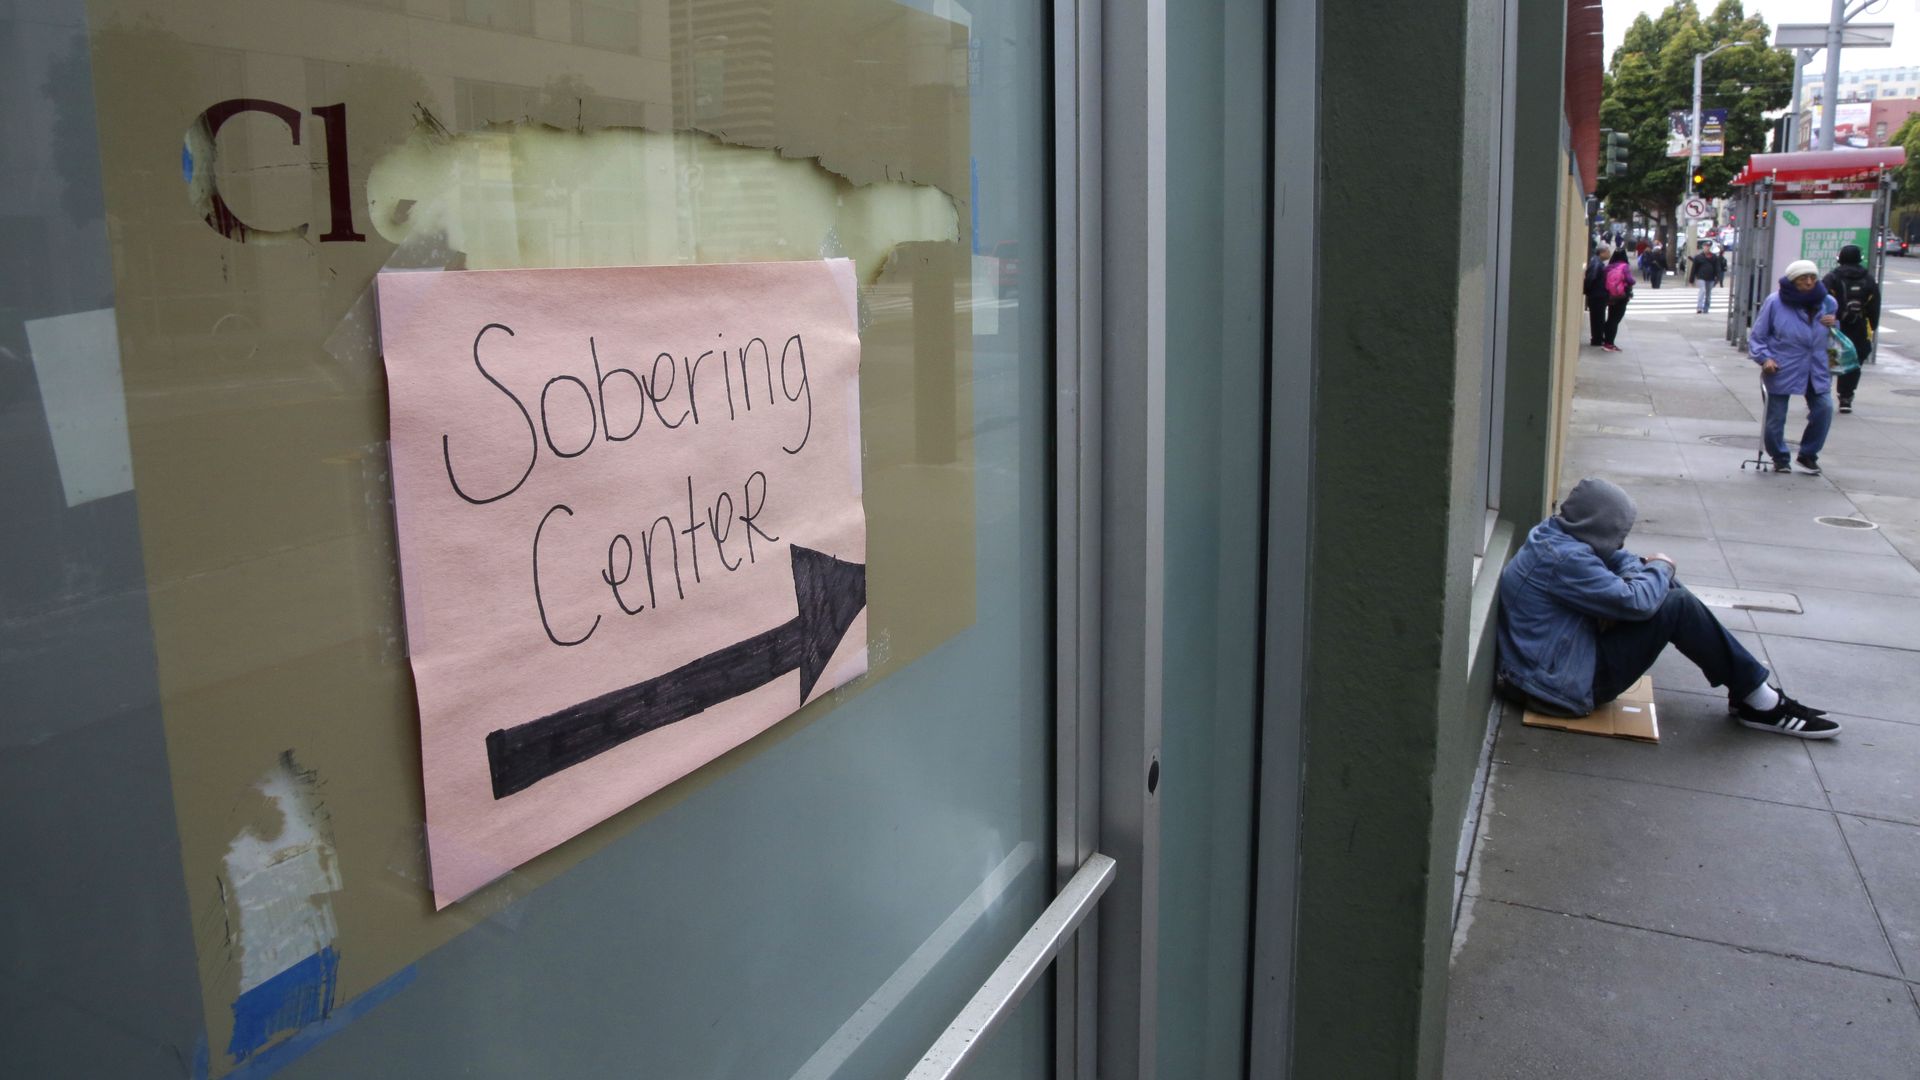 A photo of a sobering center sign in California.